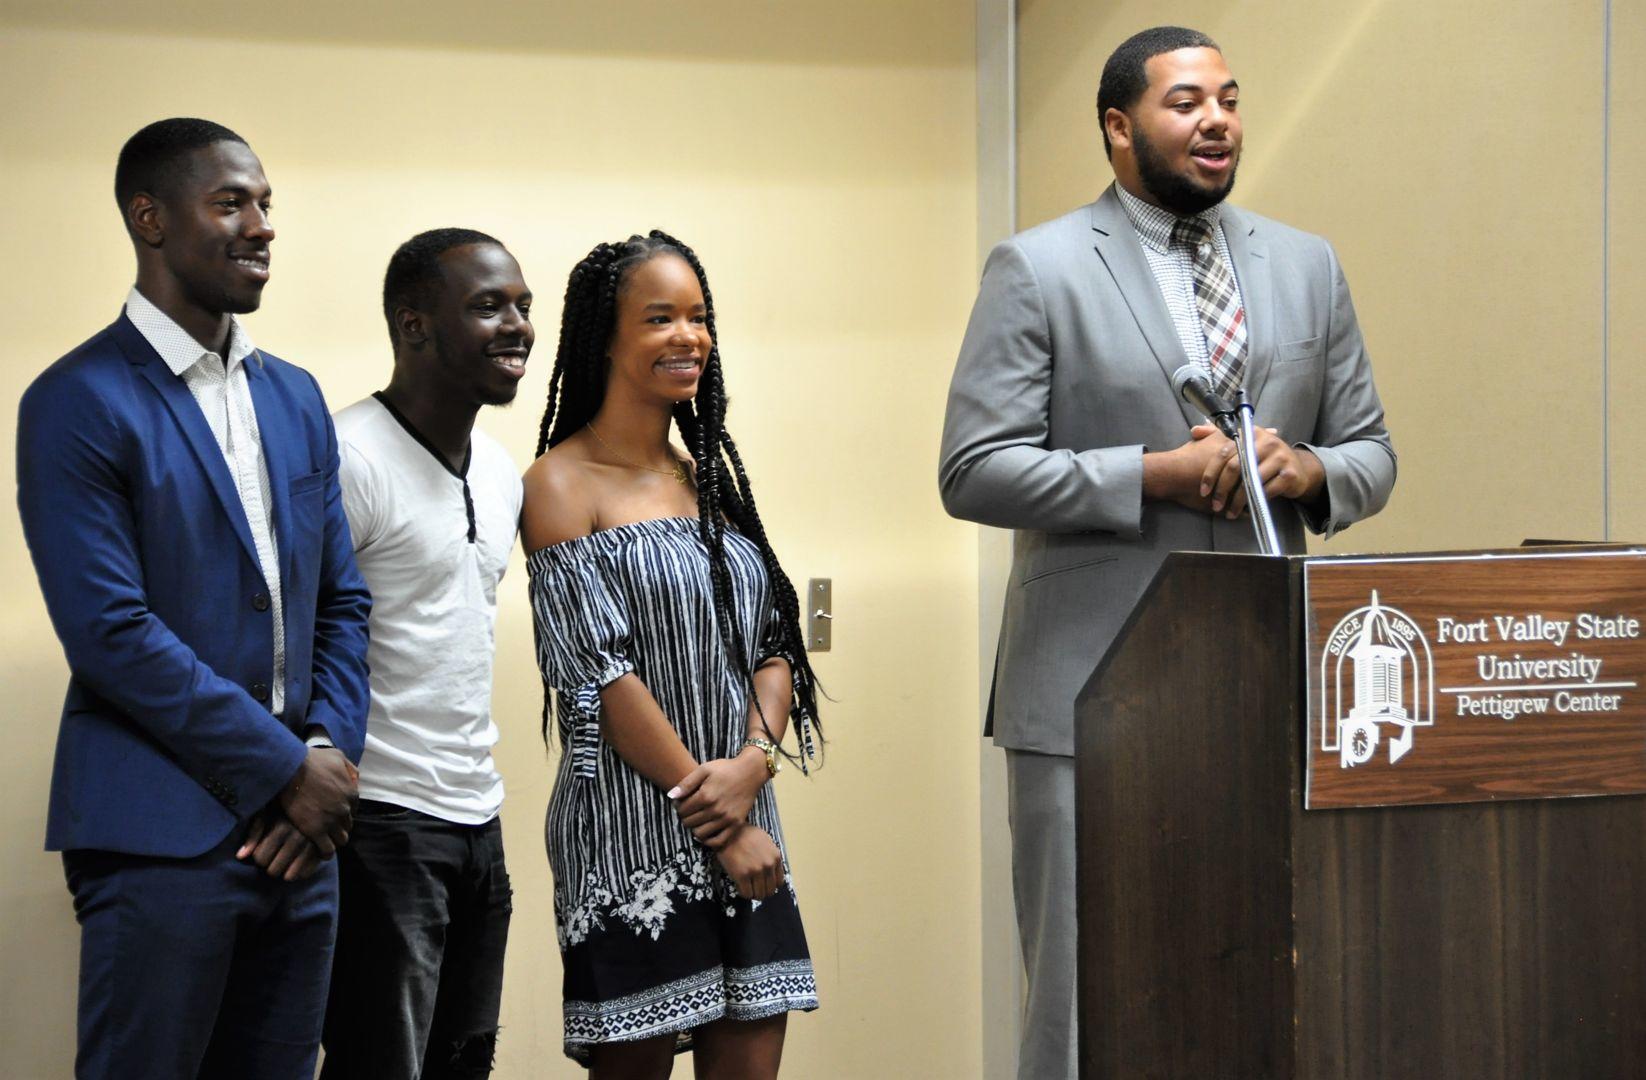 (From left to right) Fort Valley State University students James Taylor, Jontravious Wallace, Ashleigh Porter and Courtney Lester speak about their experience in the Plant Agricultural Biology Graduate Admission Pathways (PABGAP) program during a recent seminar at the Pettigrew Center.